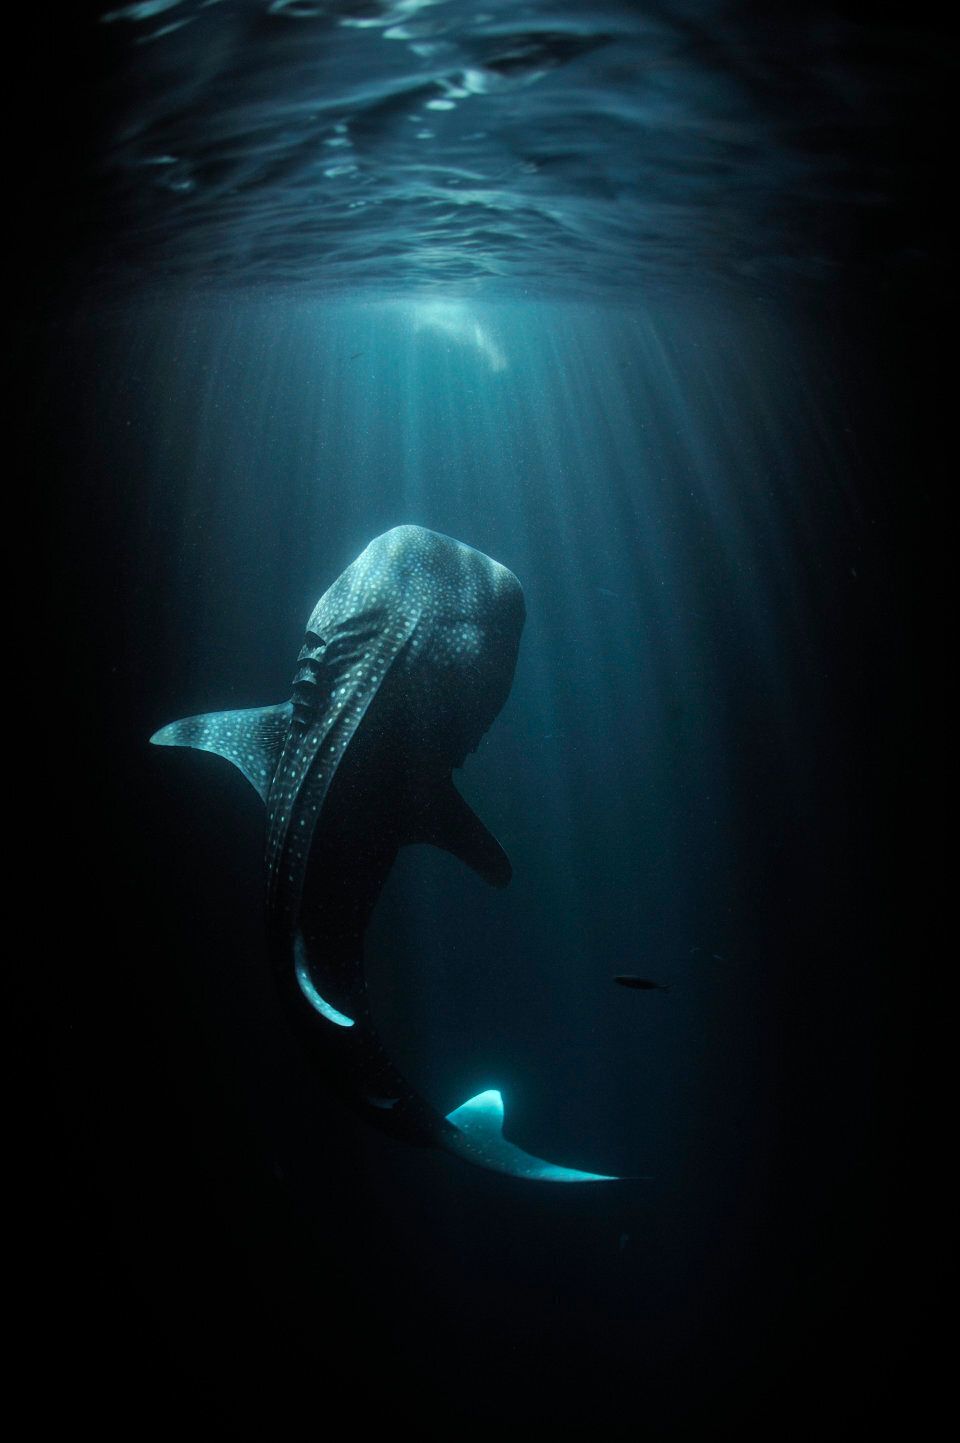 Fishermen's lights attract plankton which in turn attract a young whale shark.